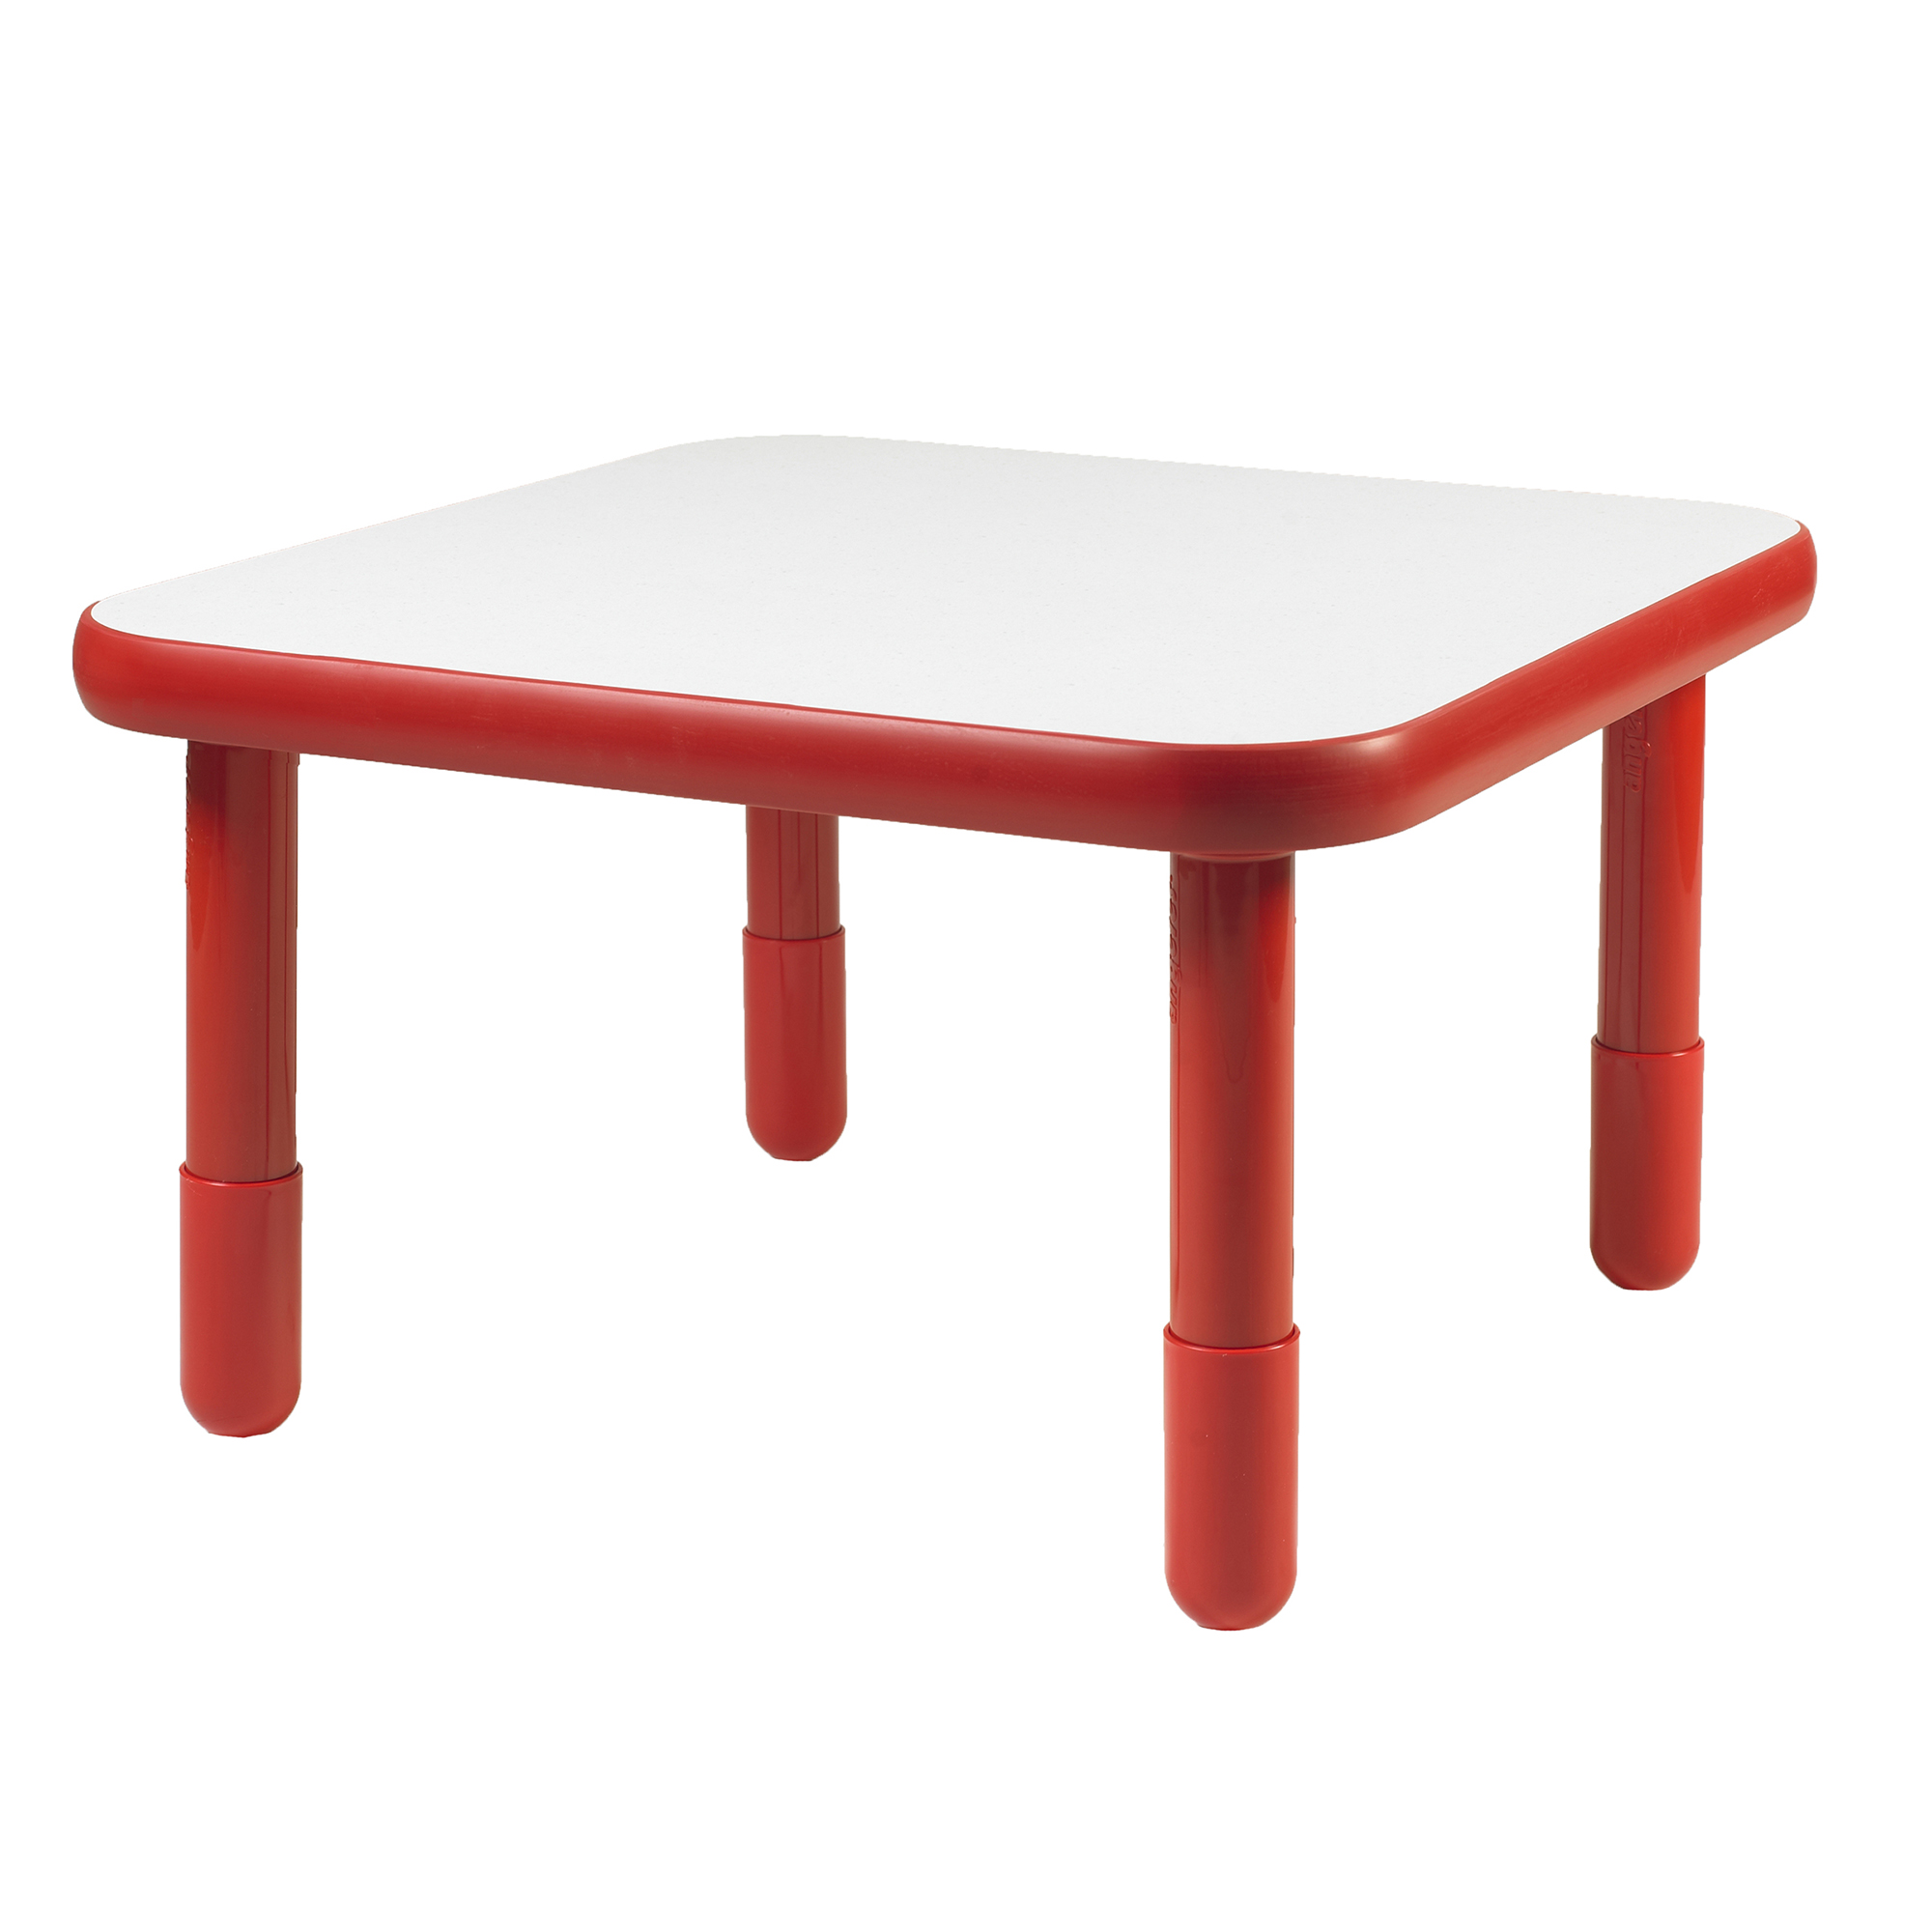 BaseLine® 76 cm  Square Table - Candy Apple Red with 45,5 cm  Legs